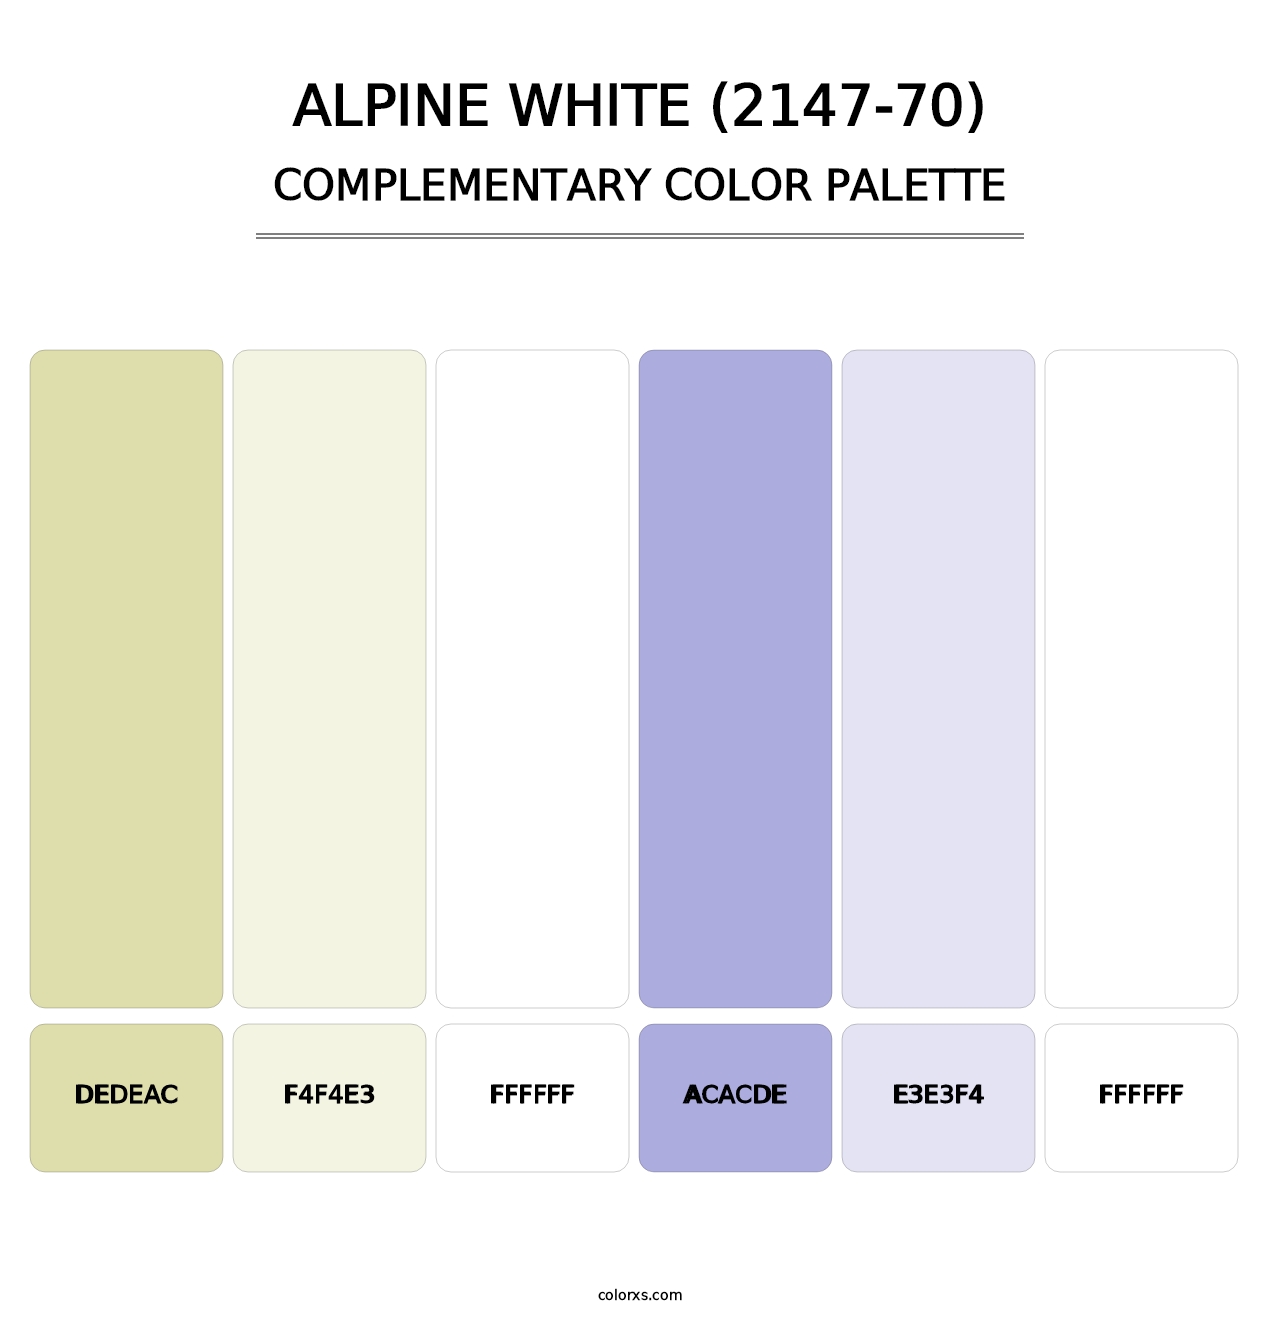 Alpine White (2147-70) - Complementary Color Palette